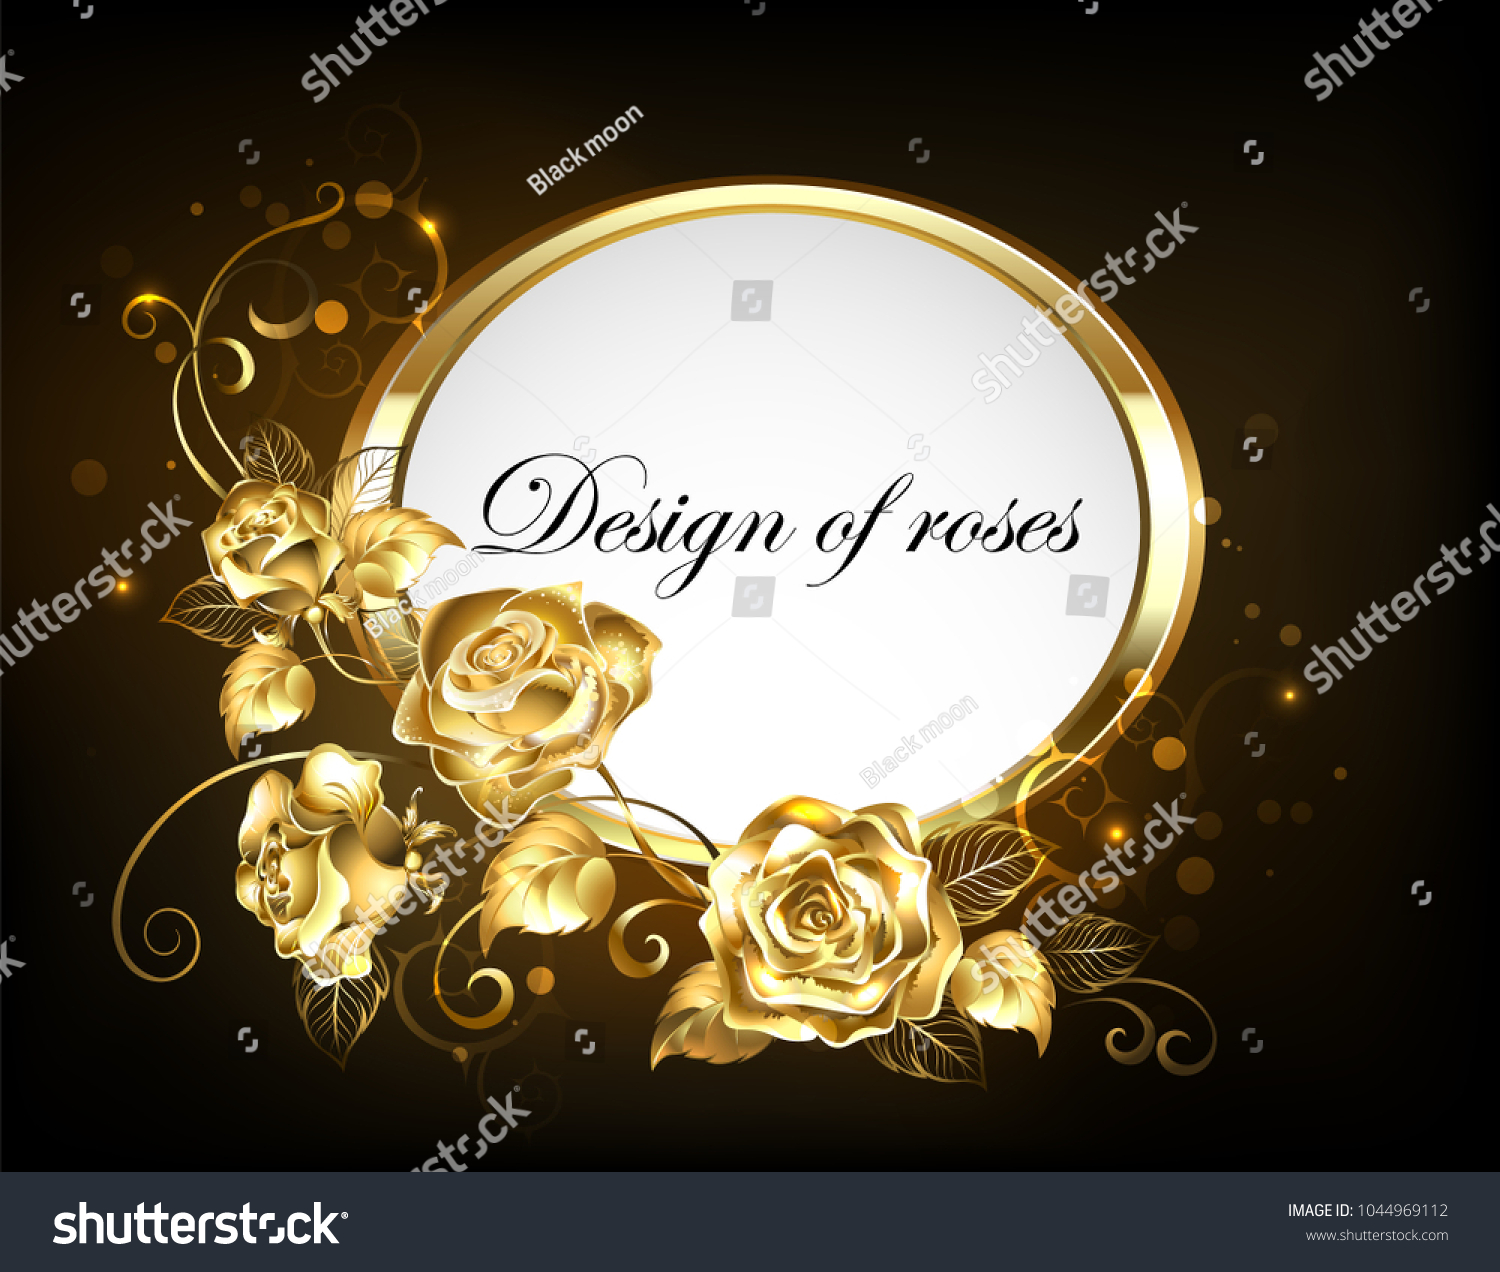 SVG of Oval banner with gold frame adorned with jeweled, intertwined roses with gold leafs on black background. 
 svg